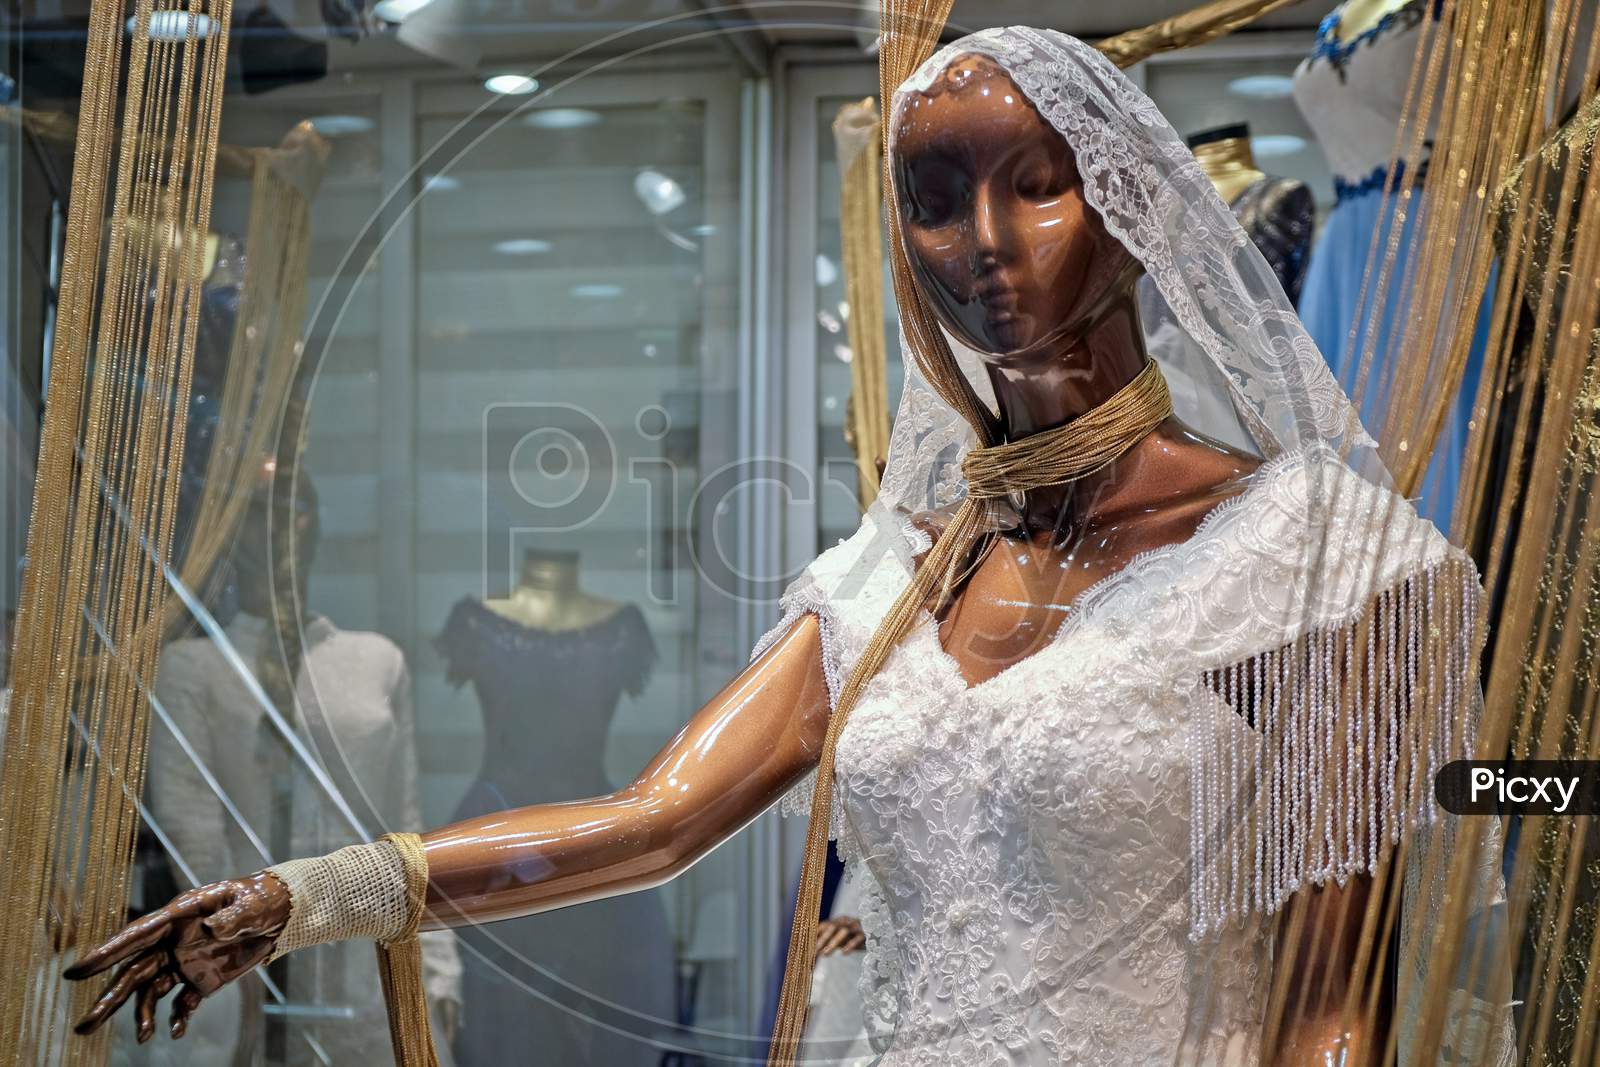 Istanbul, Turkey - May 25 : Wedding Dress For Sale In The Grand Bazaar In Istanbul Turkey On May 25, 2018